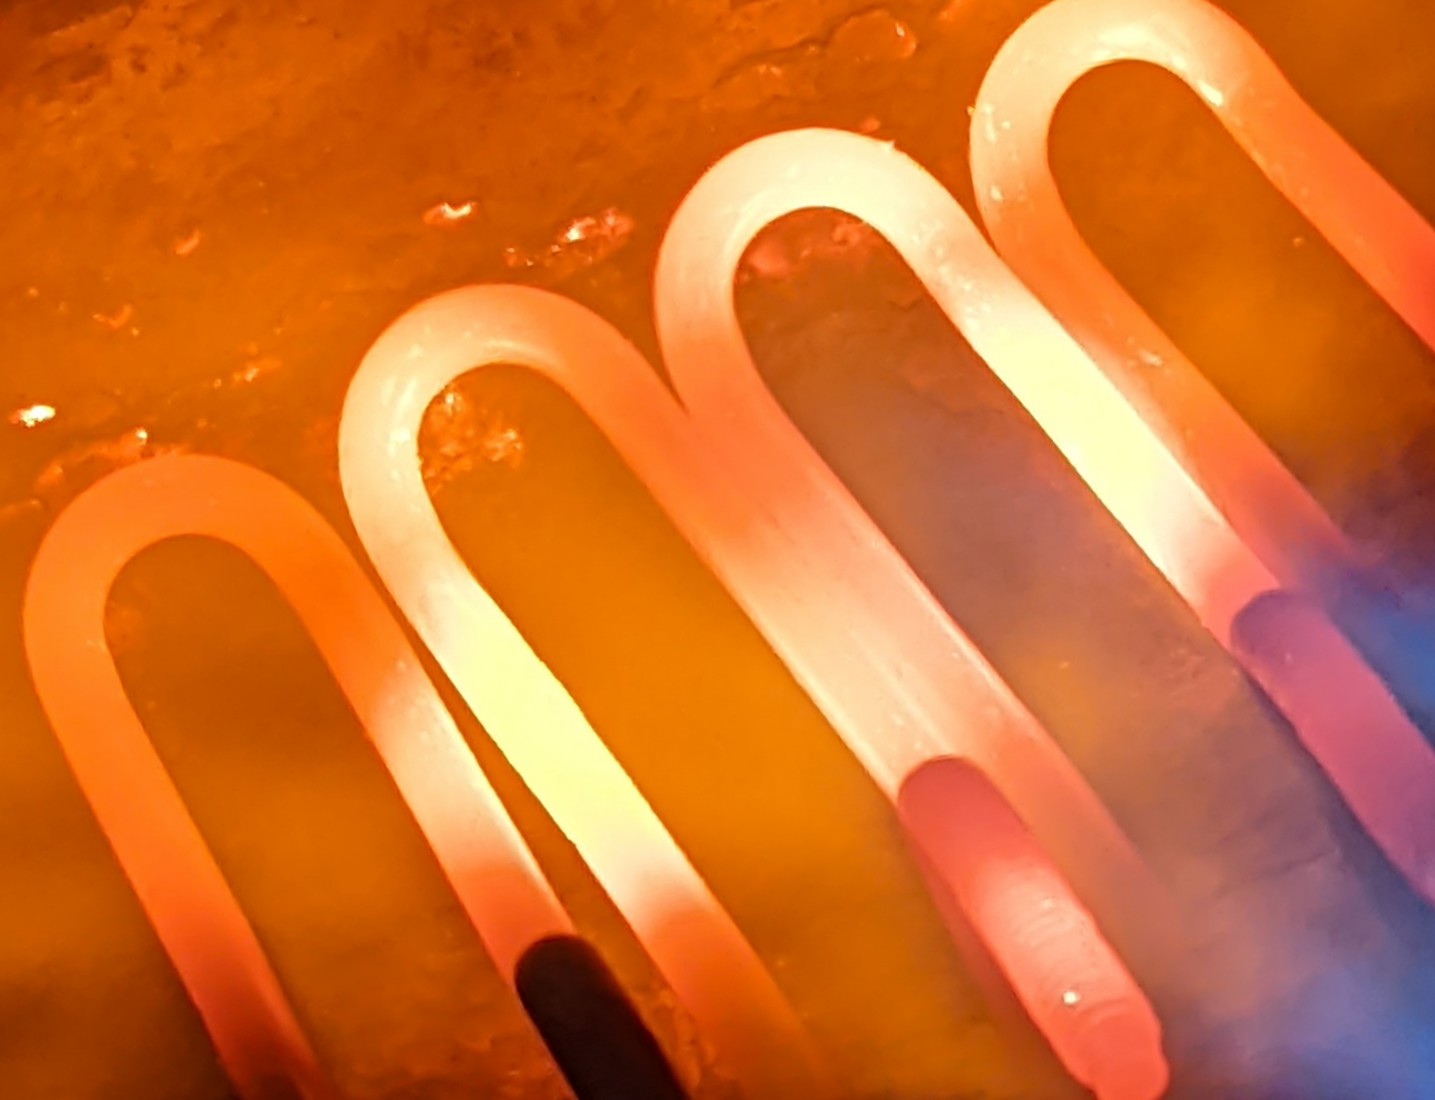 Heat treatment finishing for coil springs and wire forms